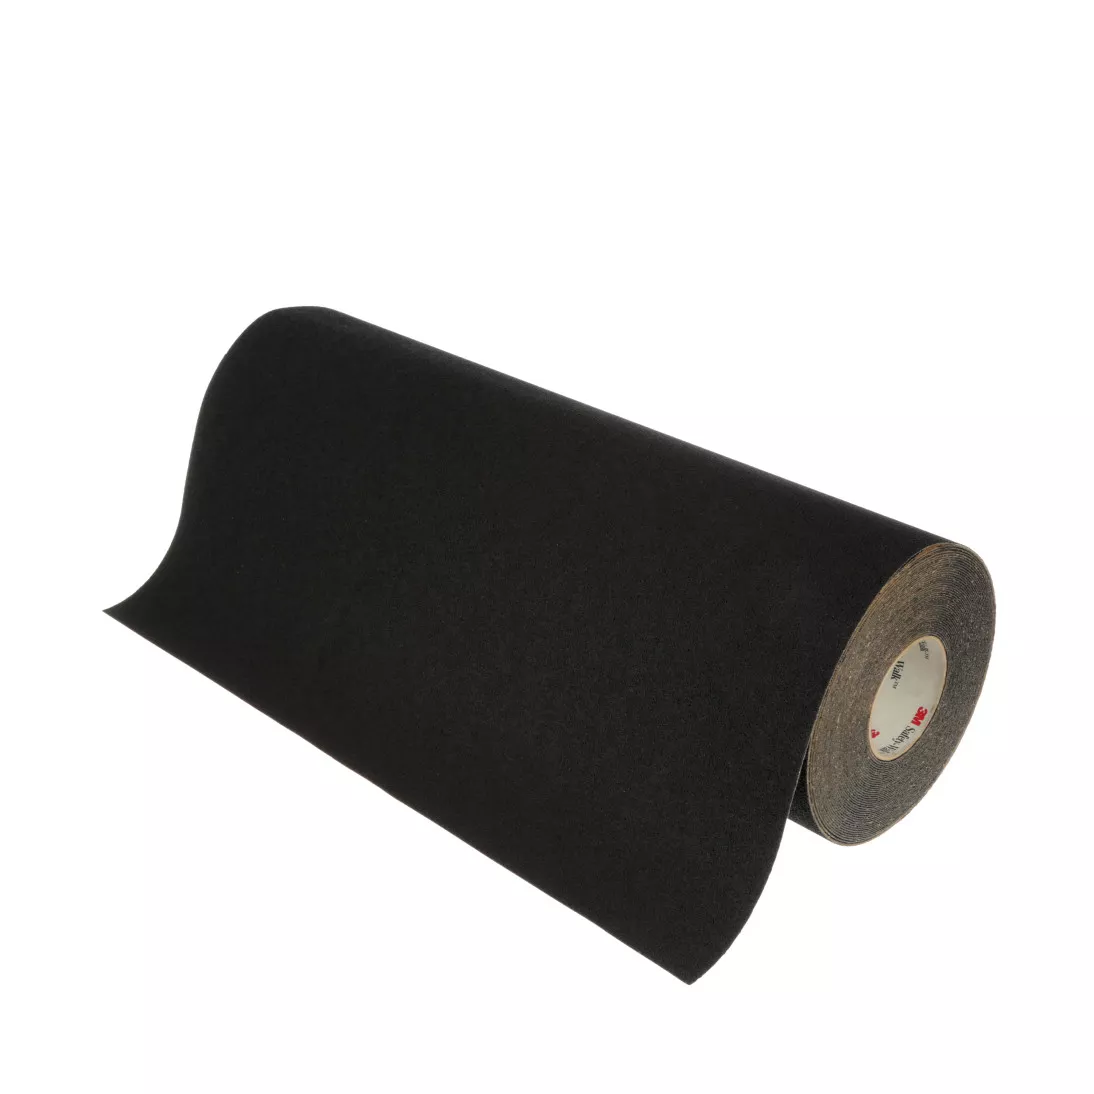 3M™ Safety Walk™ Slip-Resistent Medium Resilient Tapes & Treads 310,
Black, 49.25 in x 100 yd